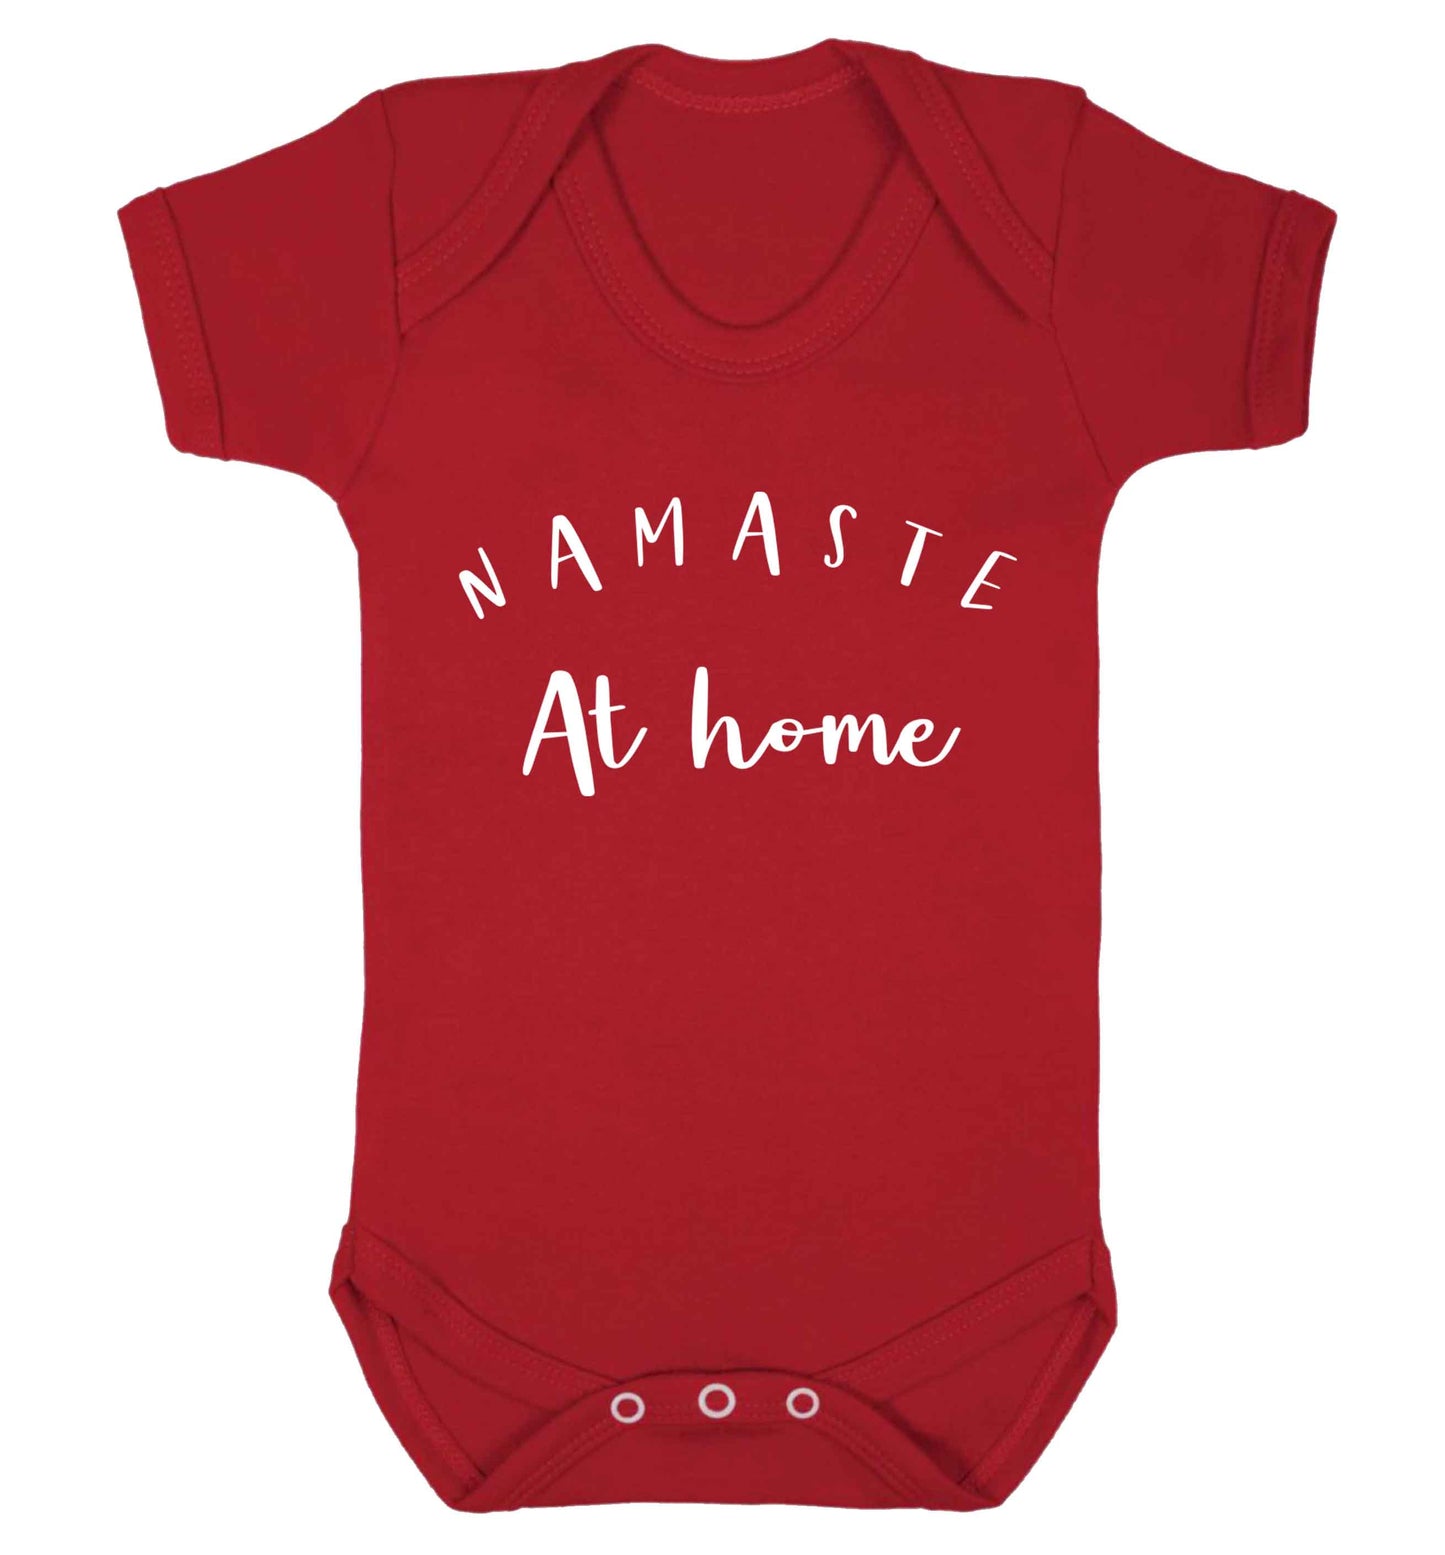 Namaste at home Baby Vest red 18-24 months